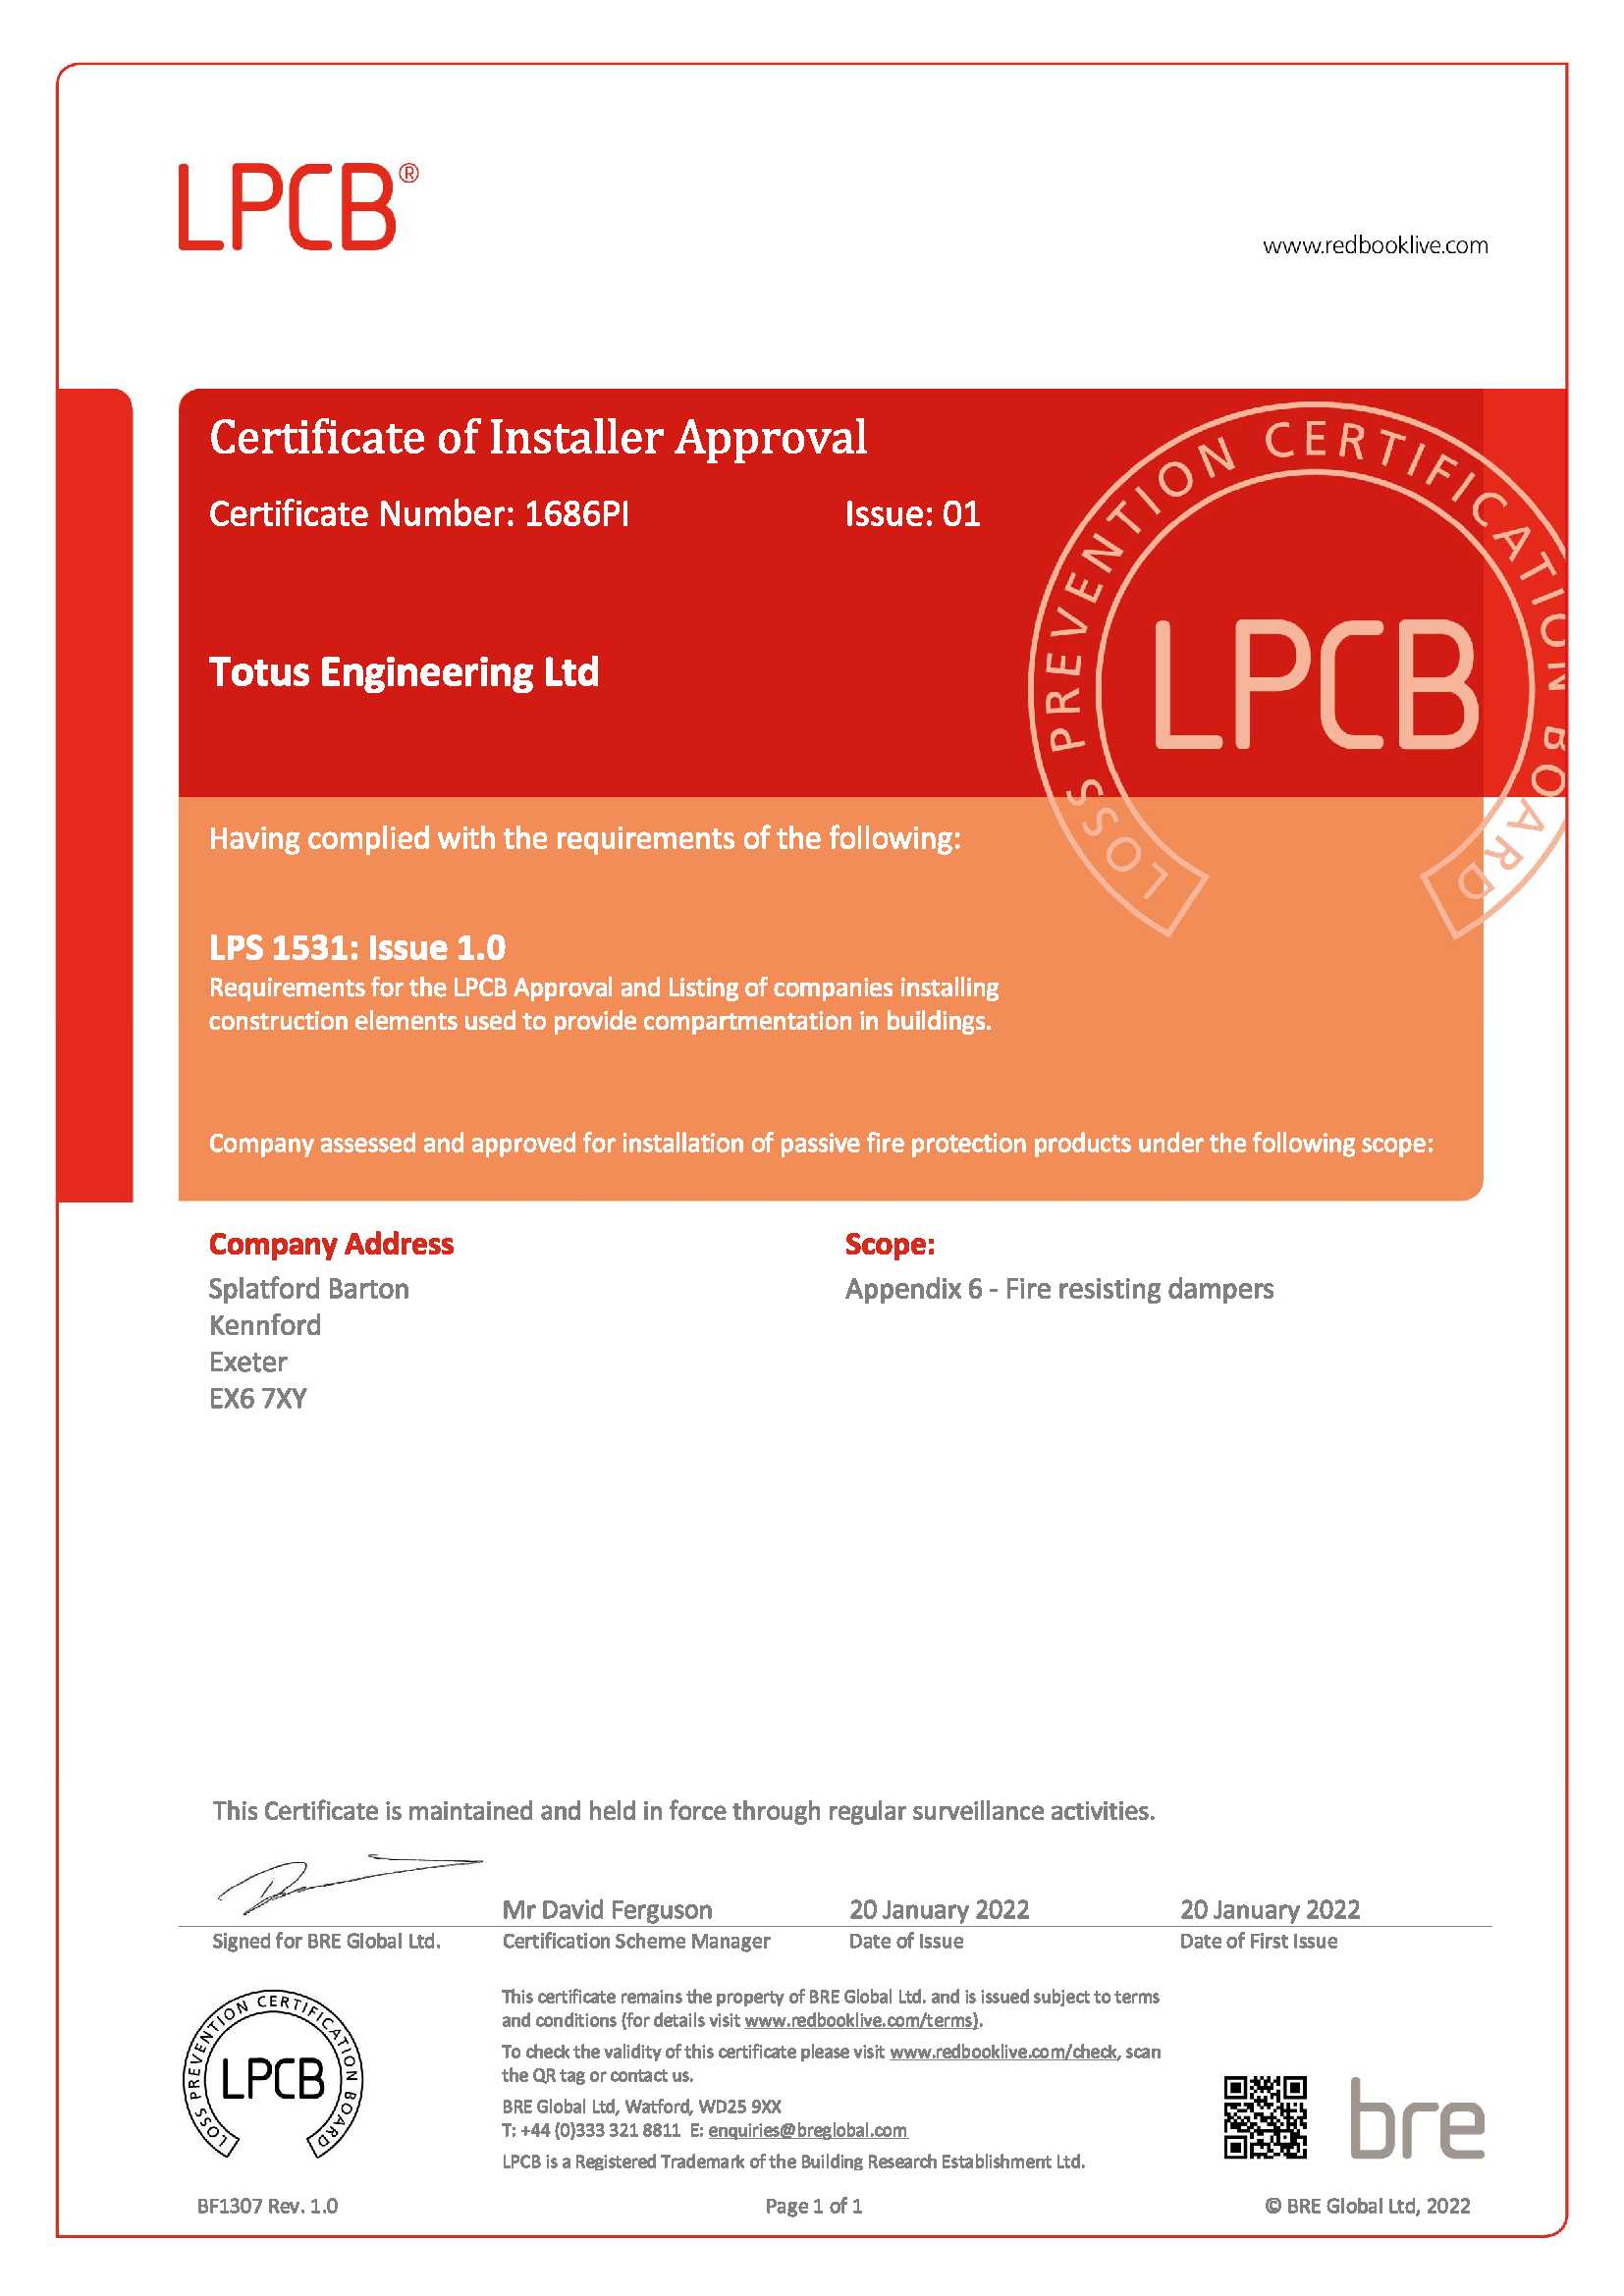 LPCB LPS 1531 Installation of Fire Resisting Dampers cert